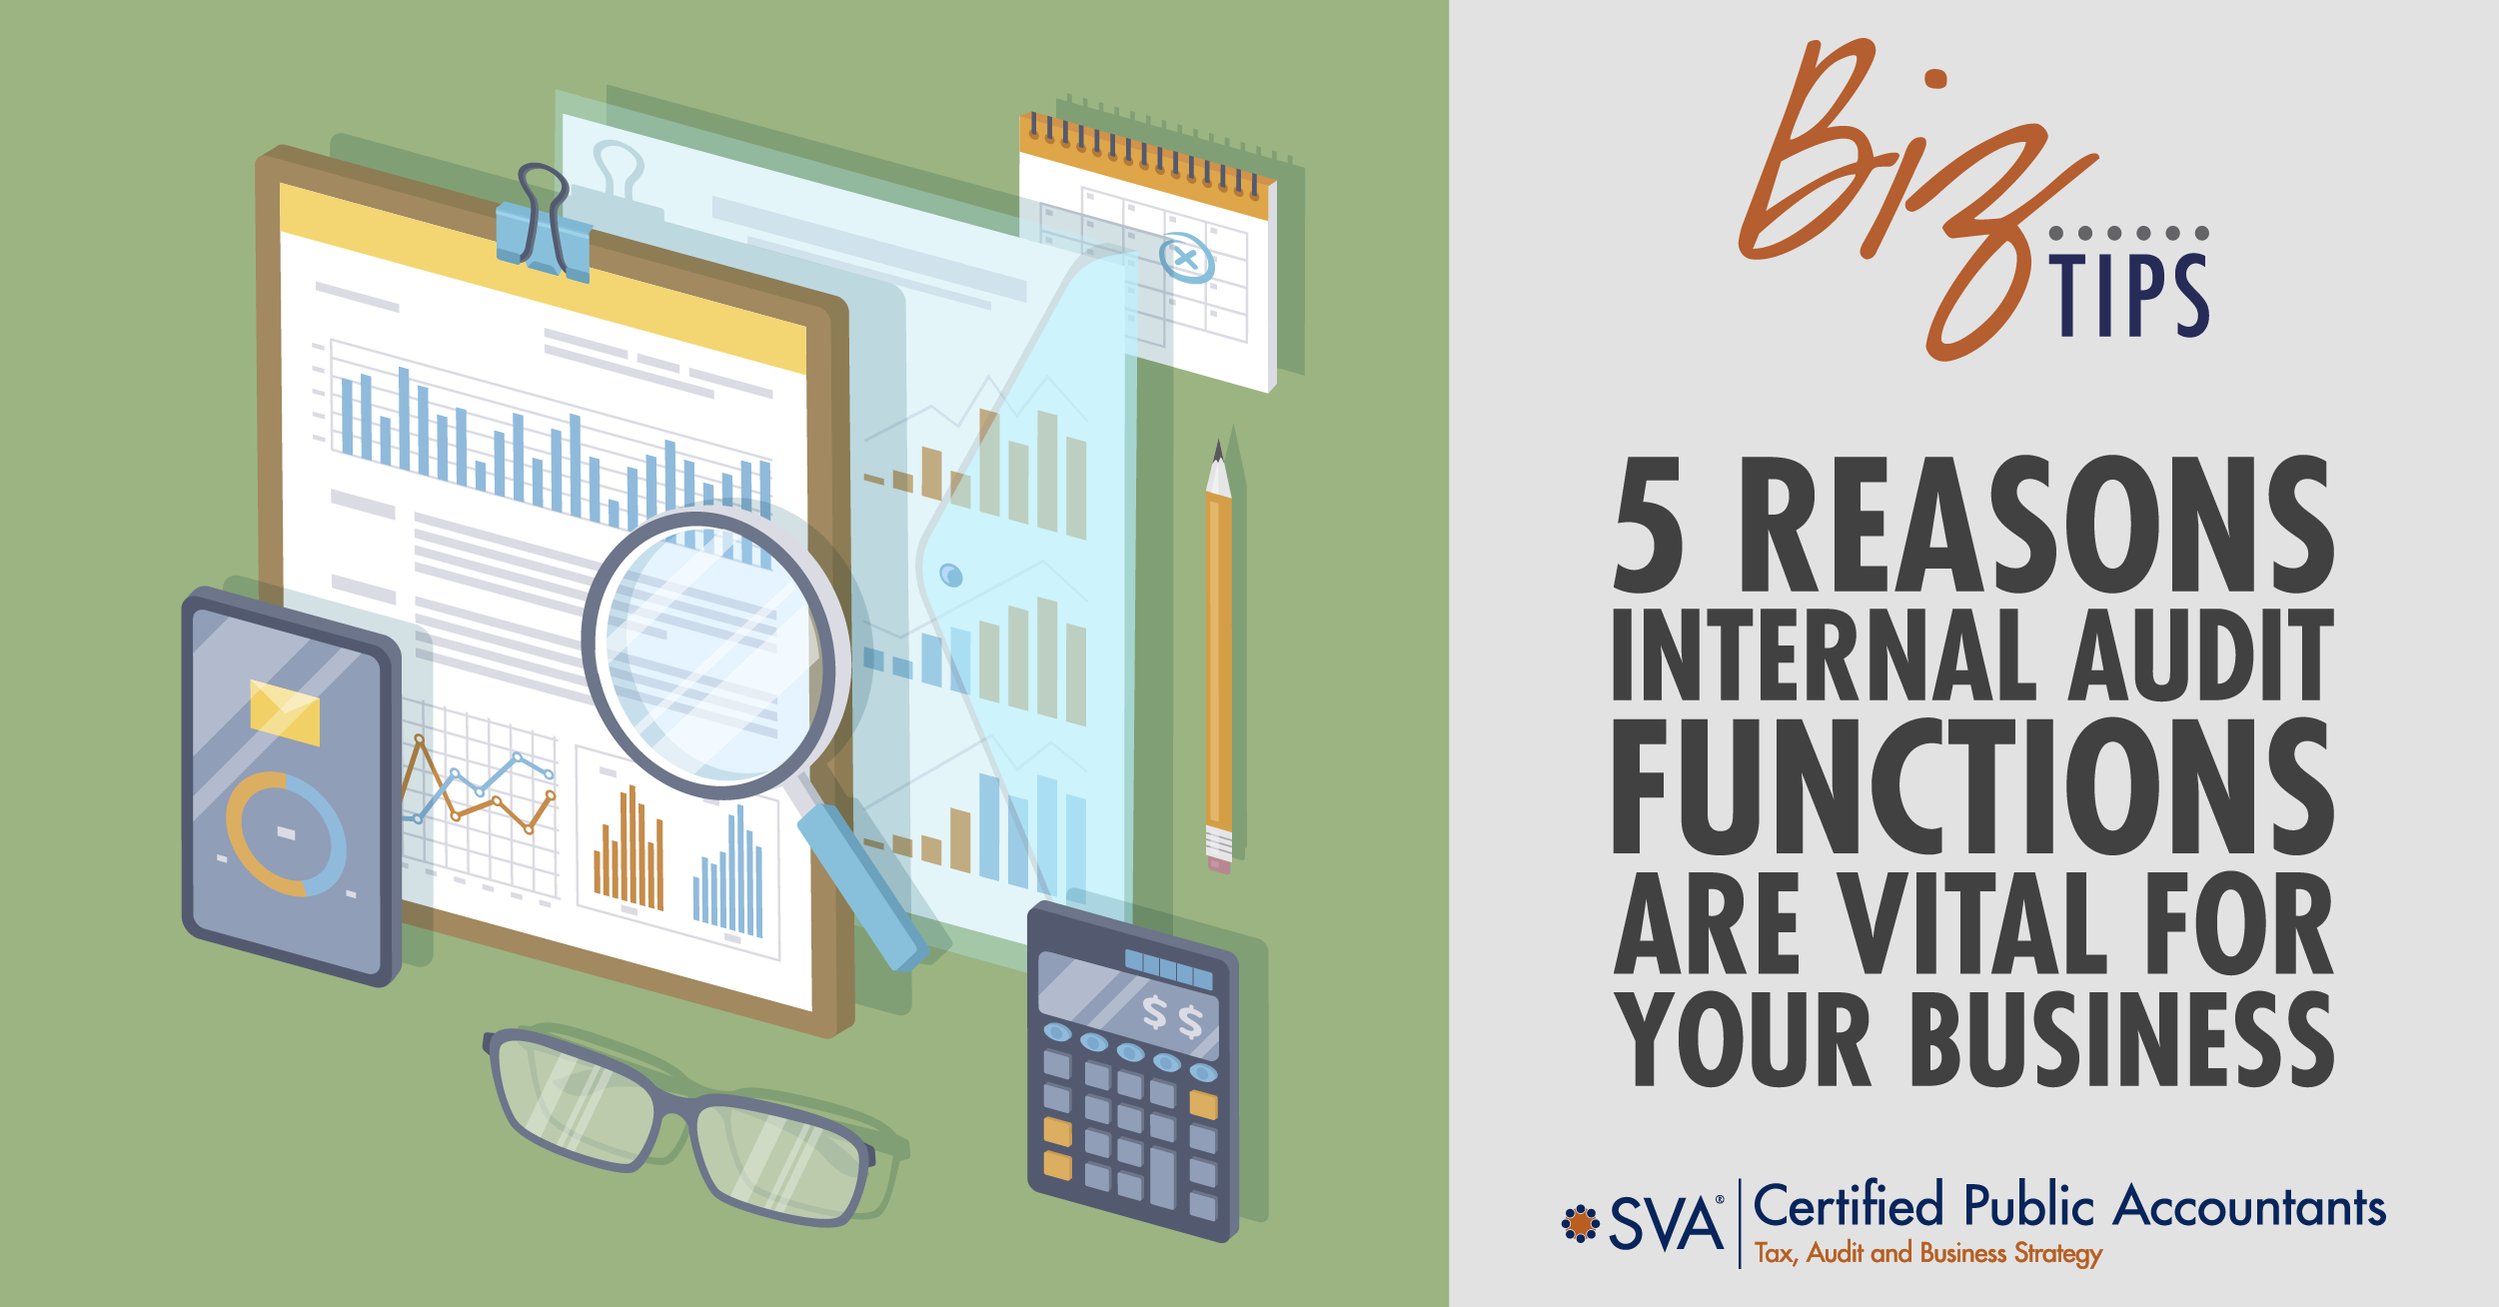 sva-certified-public-accountants-biz-tips-5-reasons-internal-audit-functions-are-vital-for-your-business